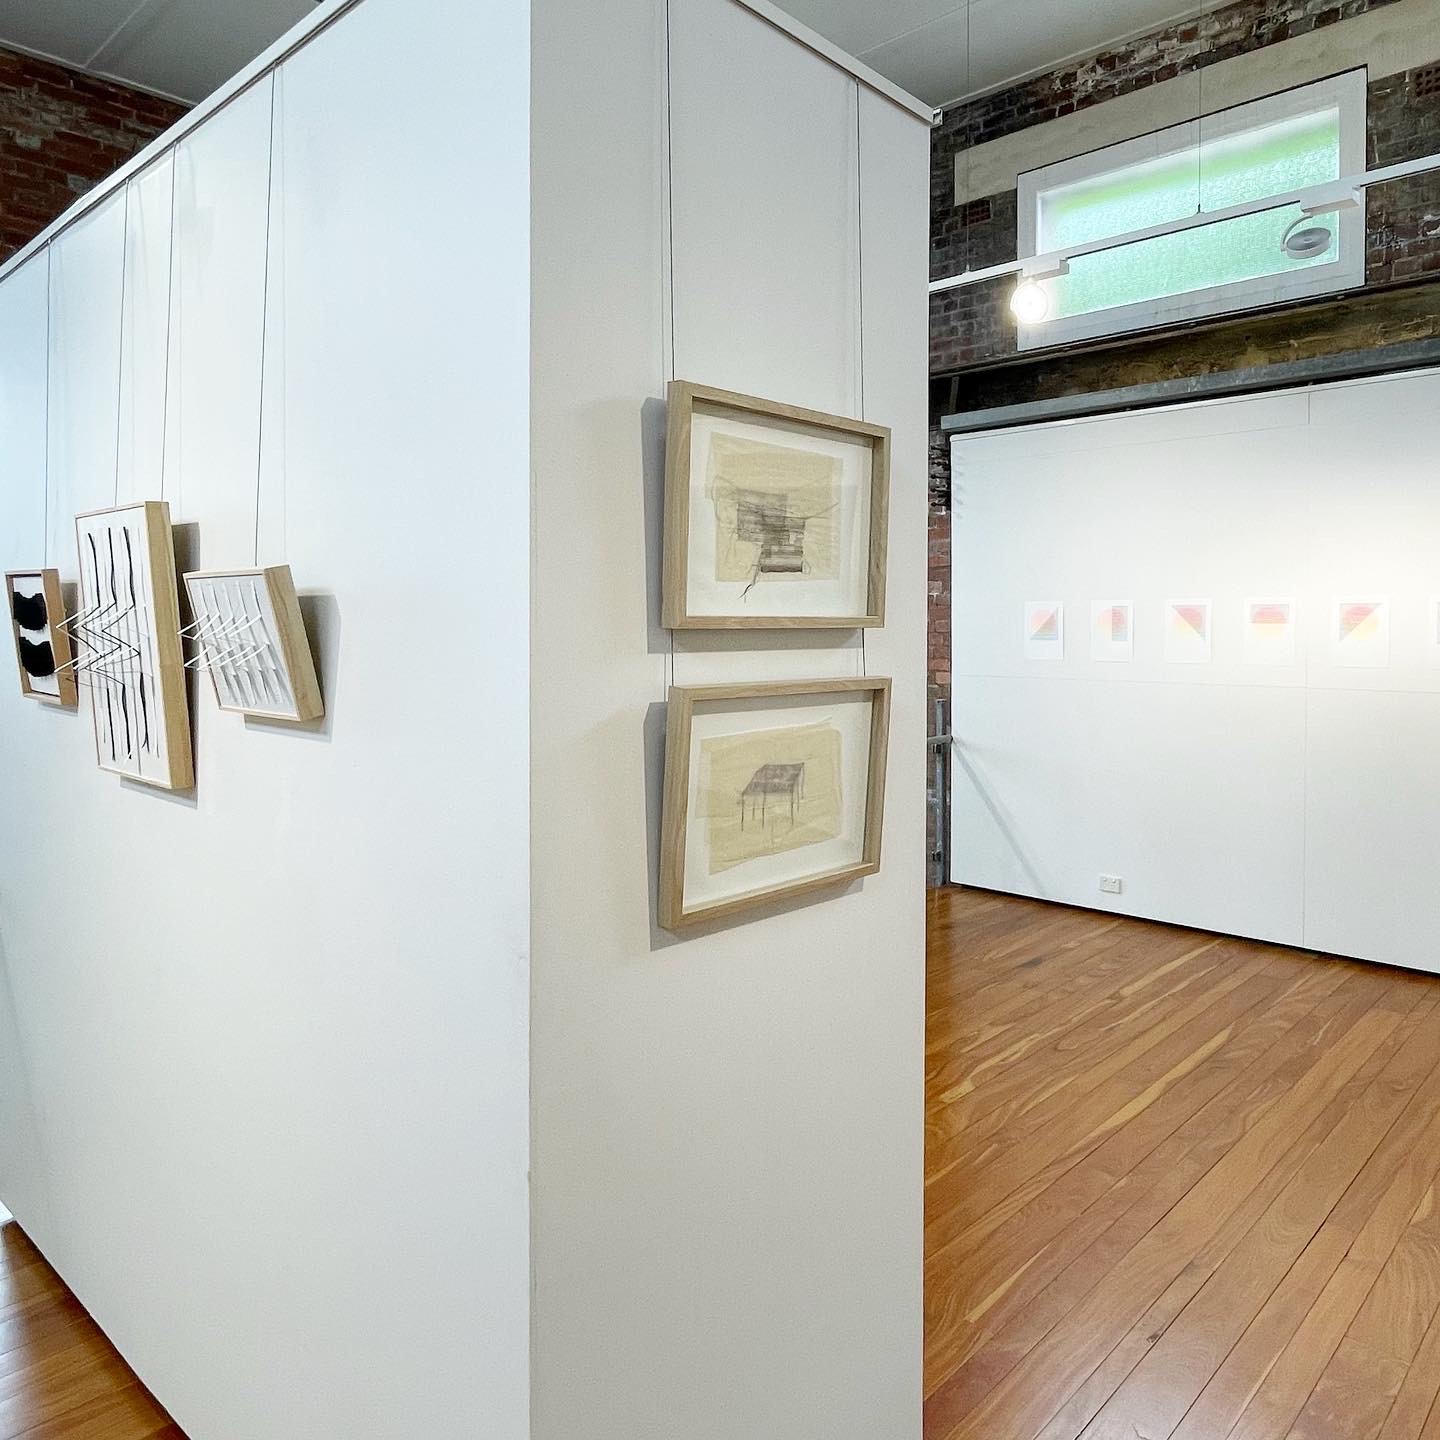 an installation view of vast and vivid - the work of Ally McKay, Tess Mehonoshen and Lucy Rebekah is visible